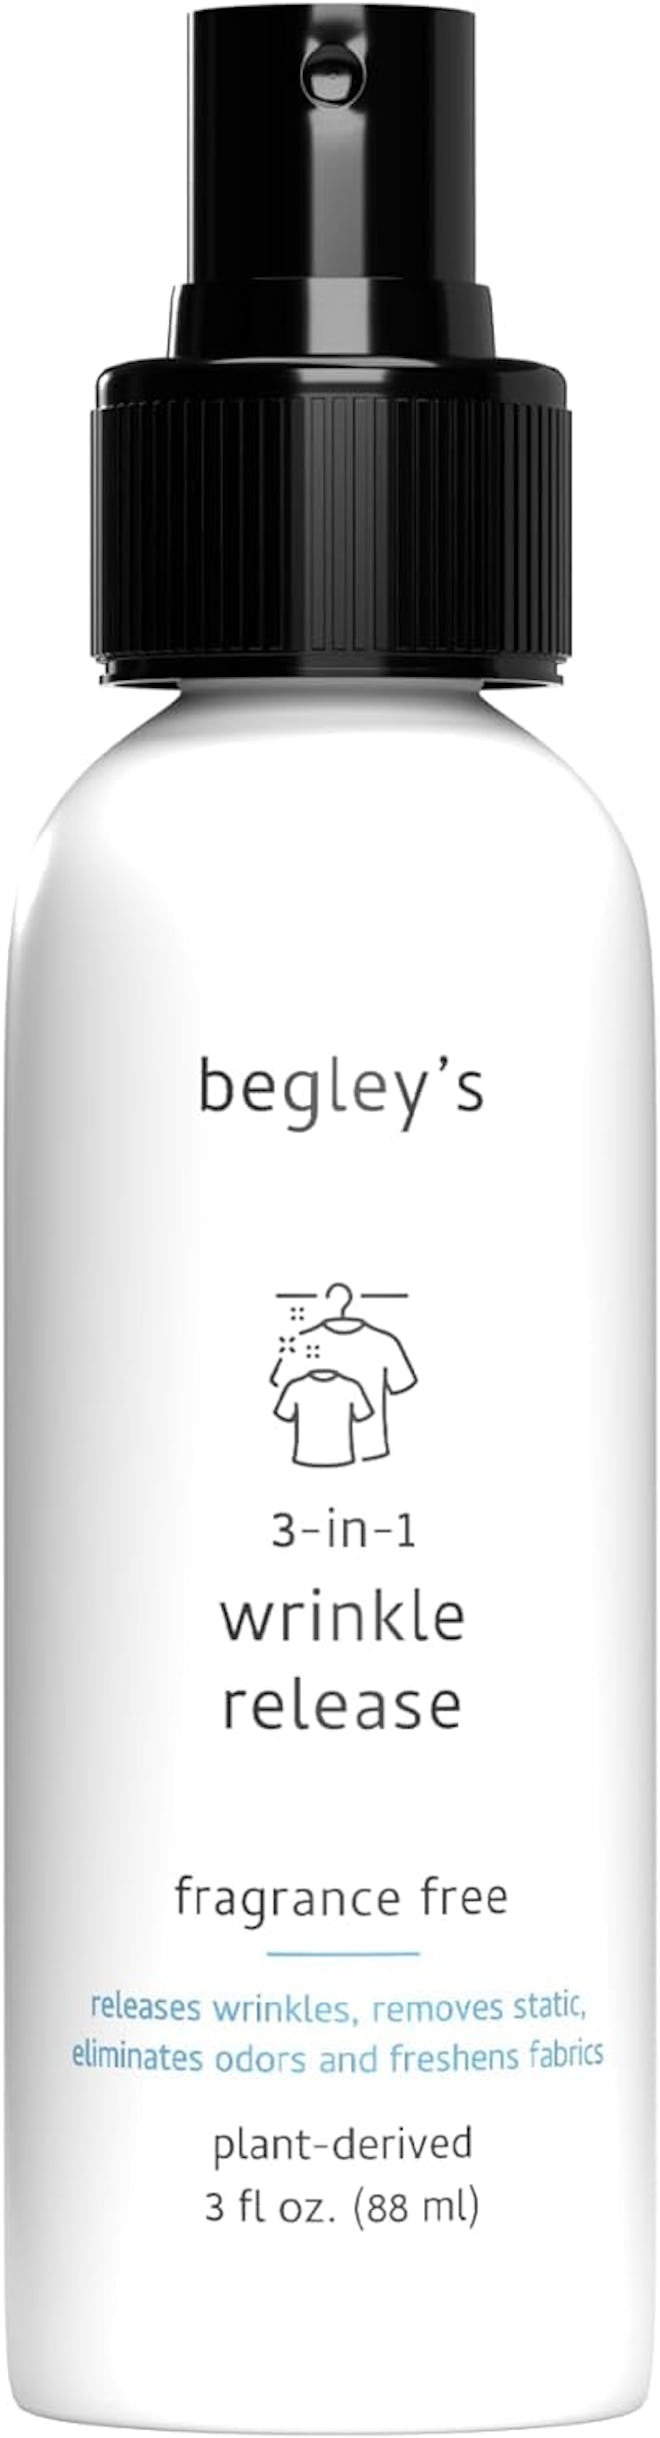 Begley's 3-in-1 Wrinkle Remover